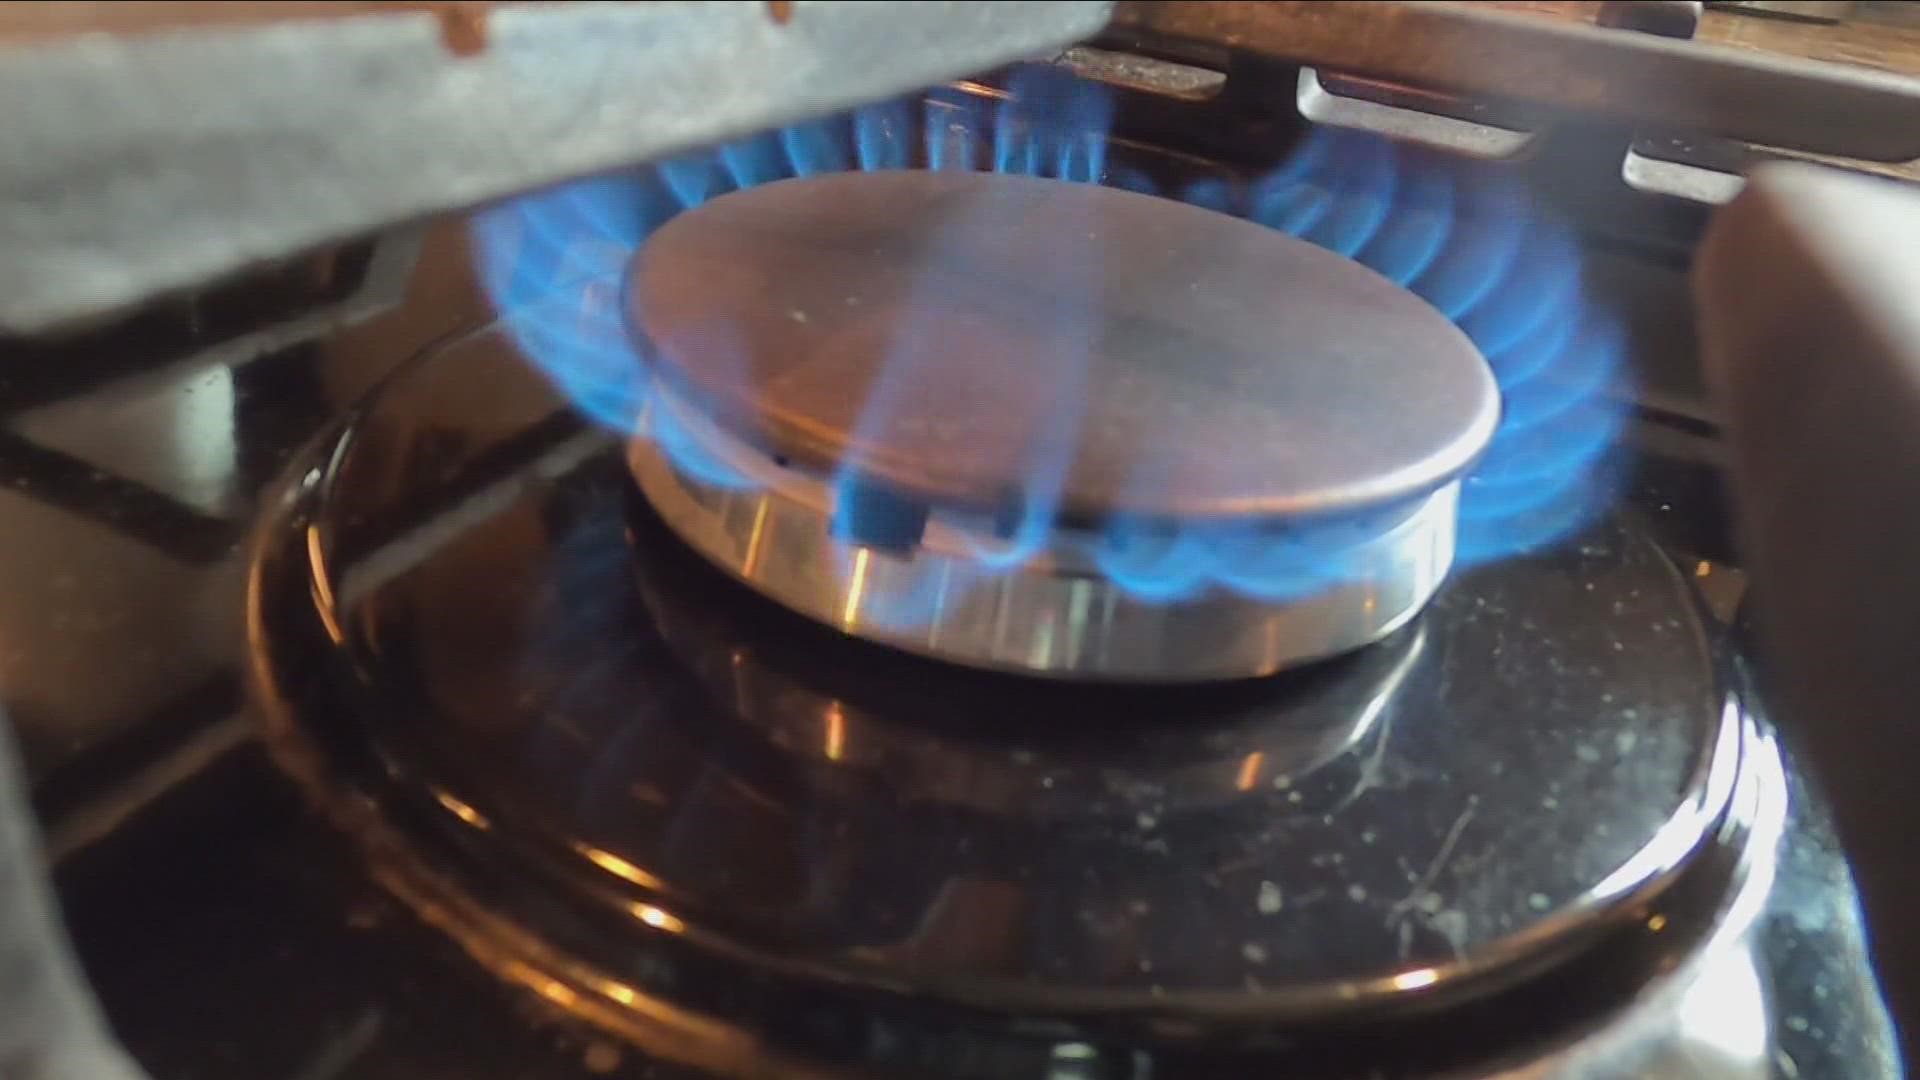 Some U.S. cities have banned natural gas hookups on new construction, but there is no federal ban on the purchase of gas stoves.